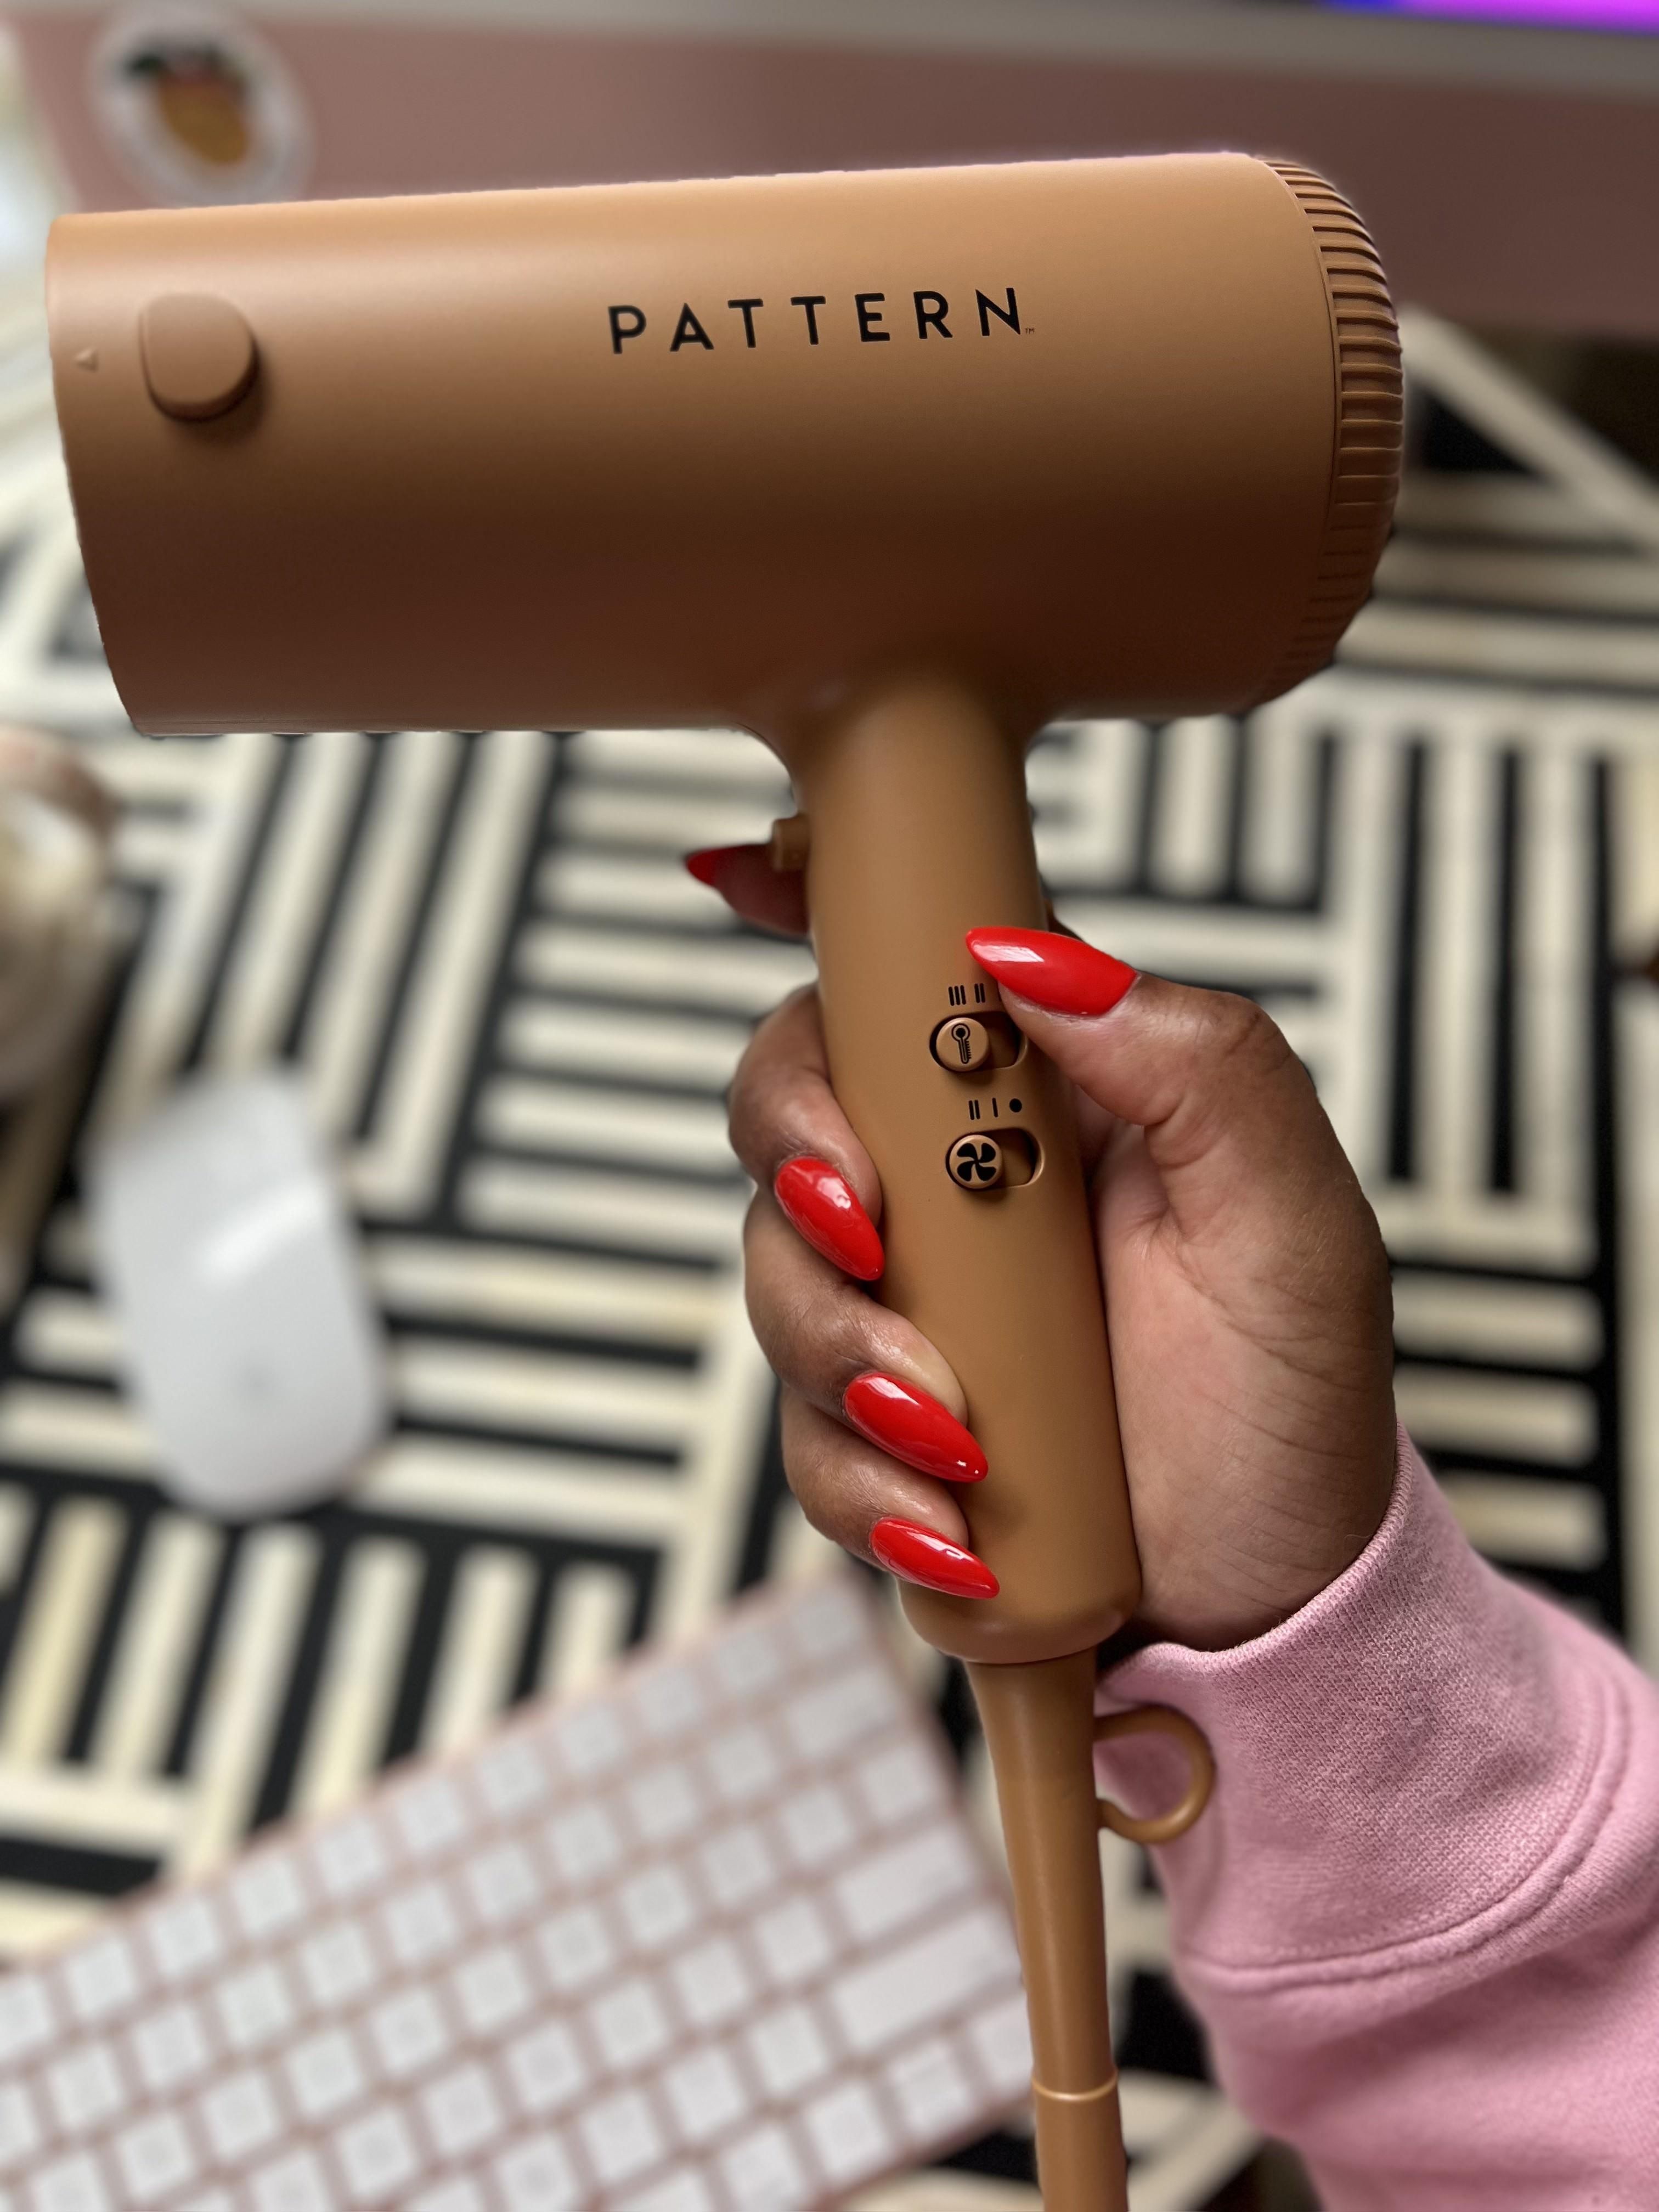 Pattern by Tracee Ellis Ross The Blow Dryer with Four Attachments